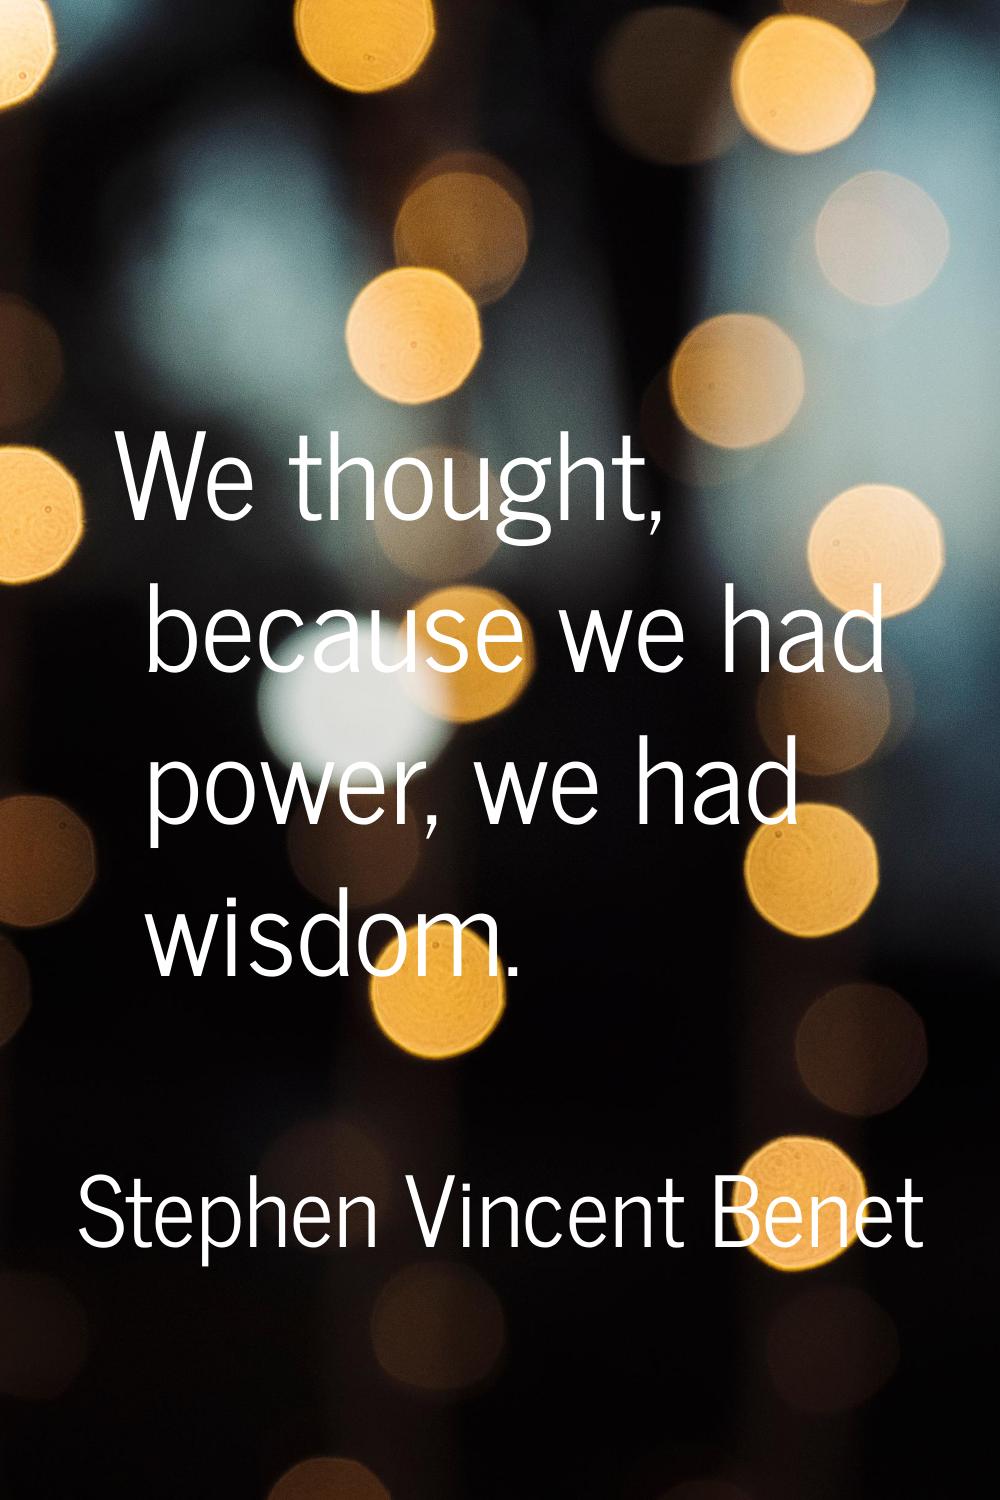 We thought, because we had power, we had wisdom.